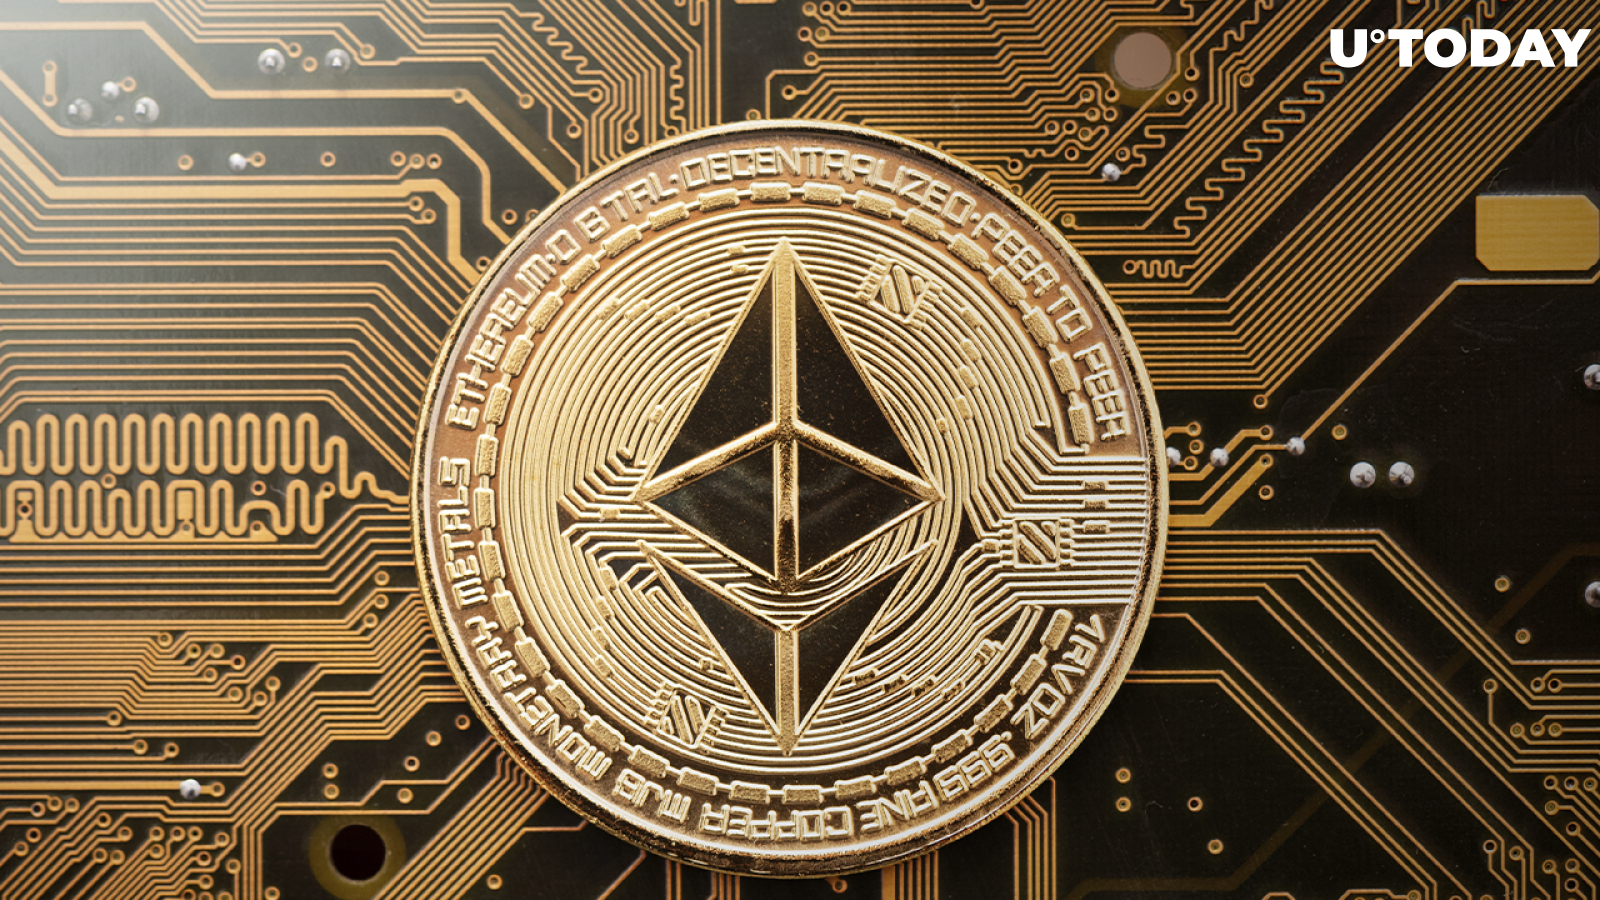 This Ethereum Balance Exceeded 10 Million ETH, Here's What It Is